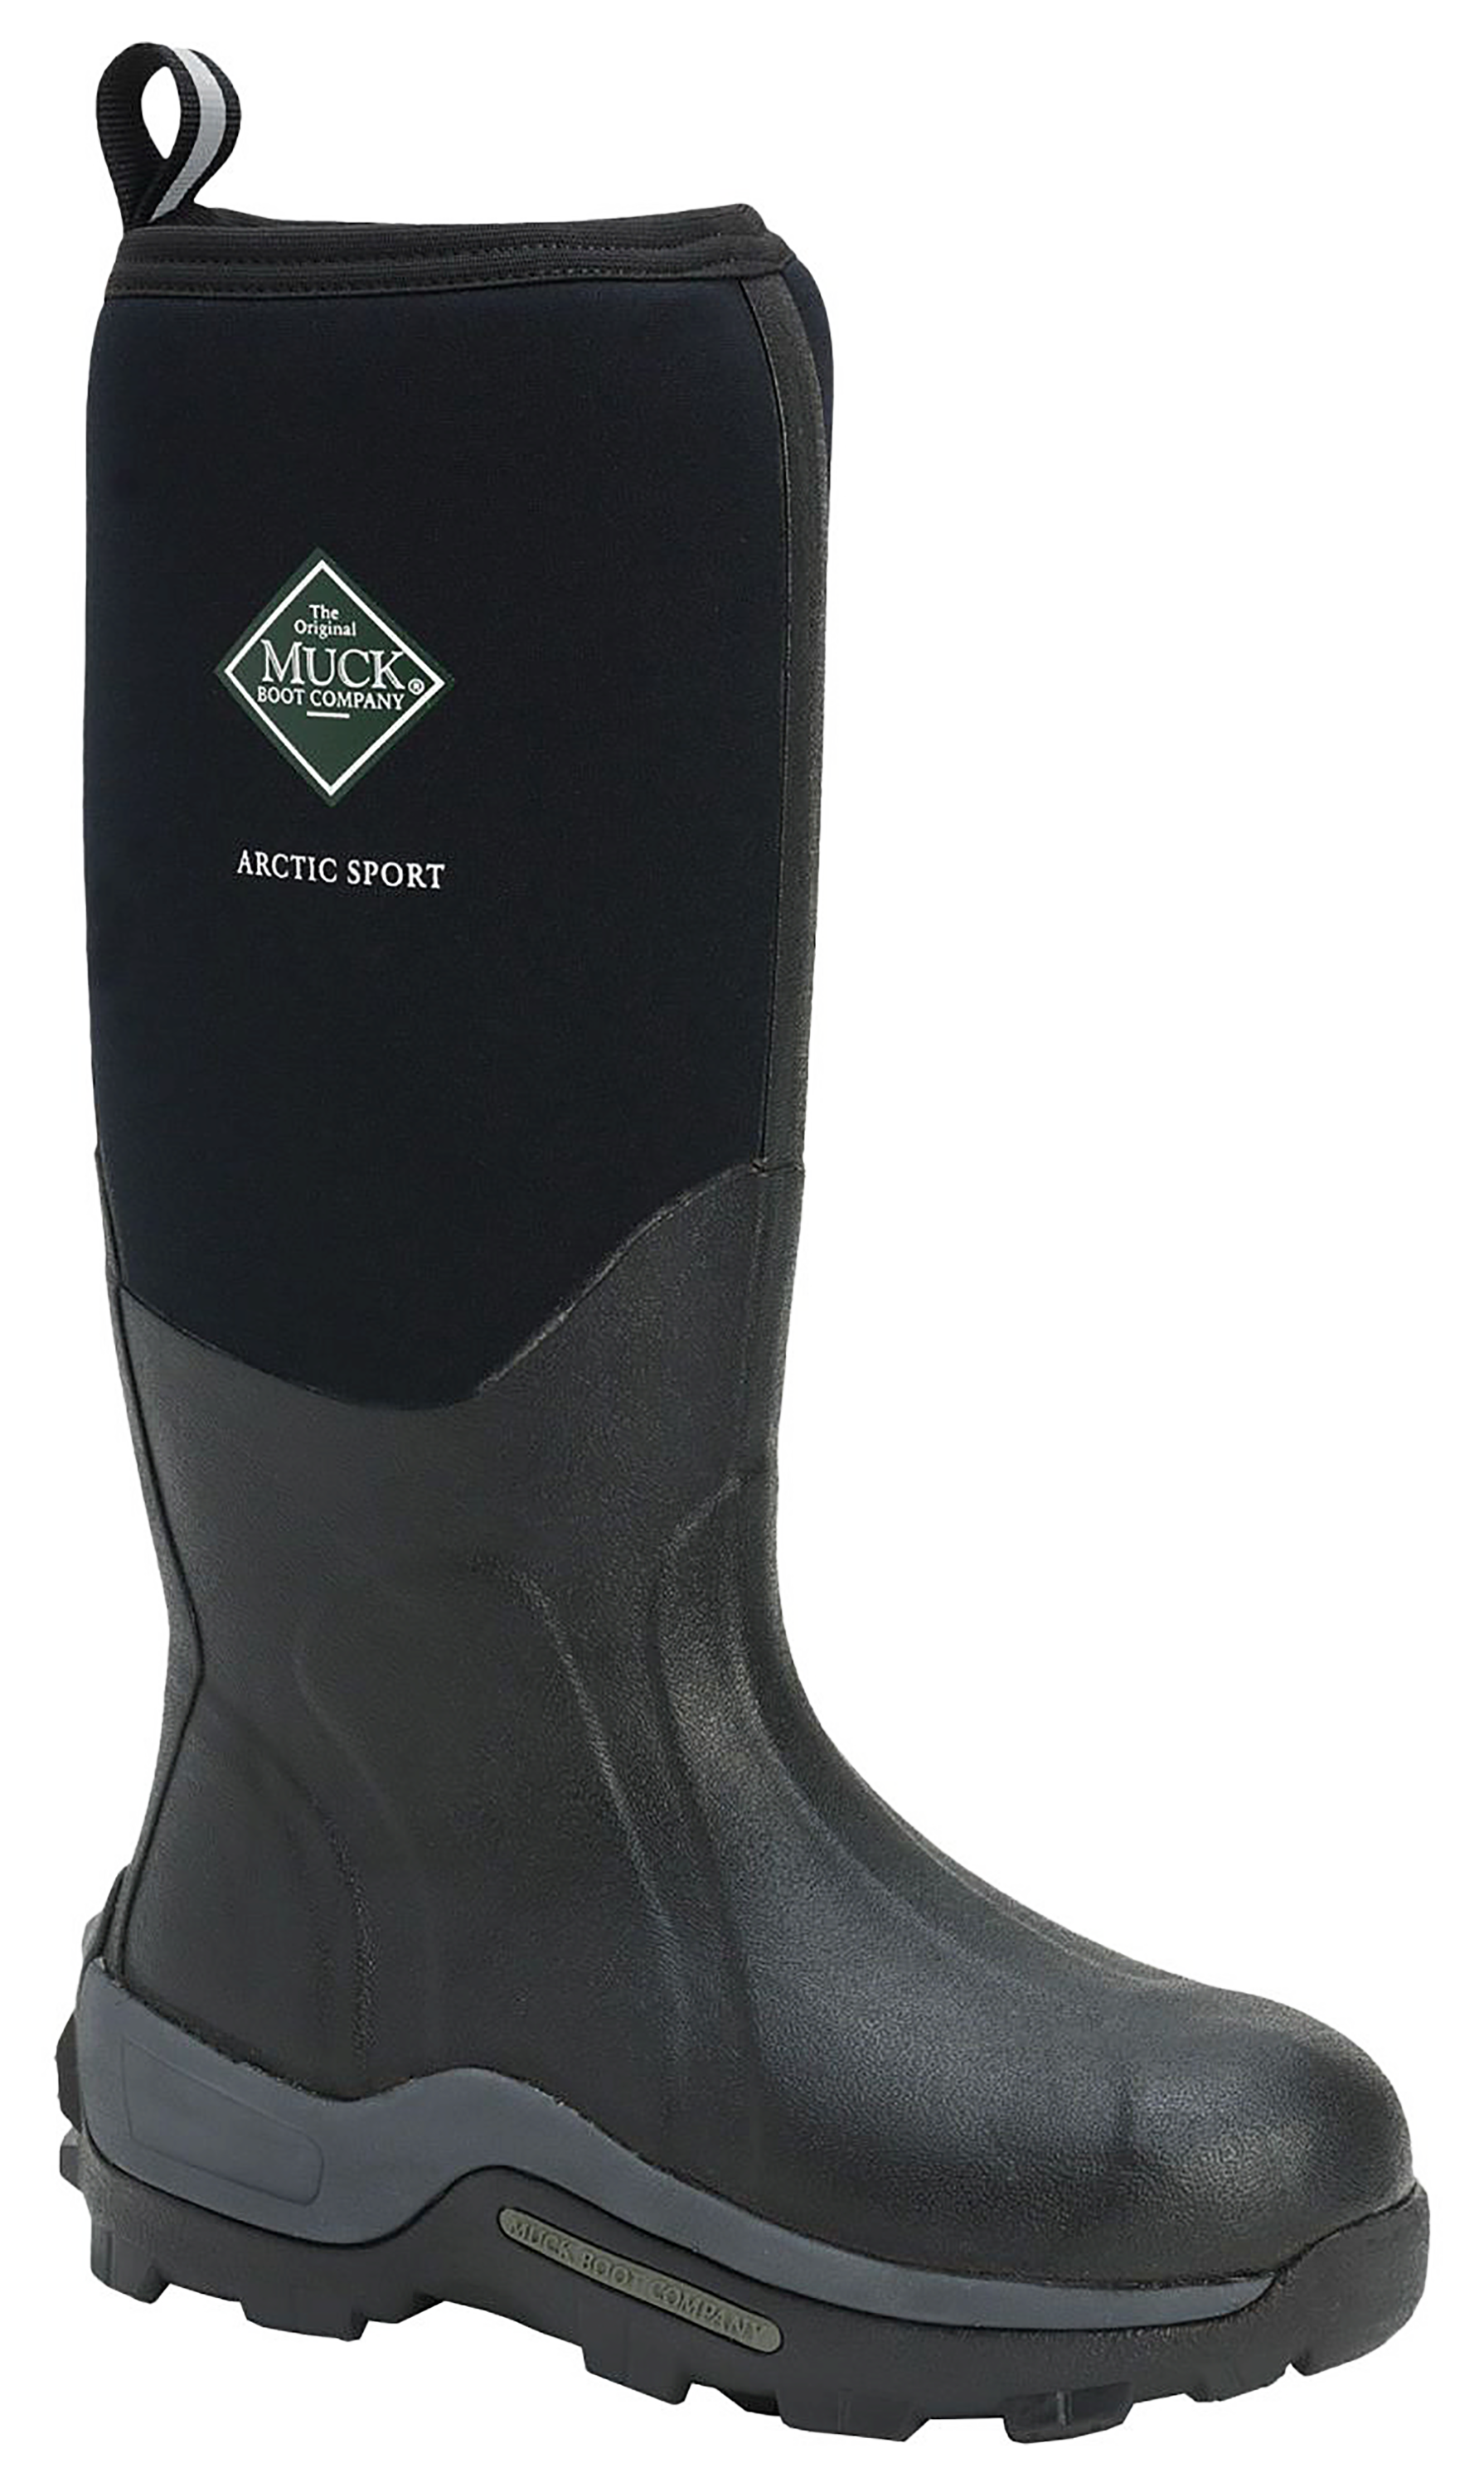 The Original Muck Boot Company Arctic Sport Tall Rubber Boots for Men